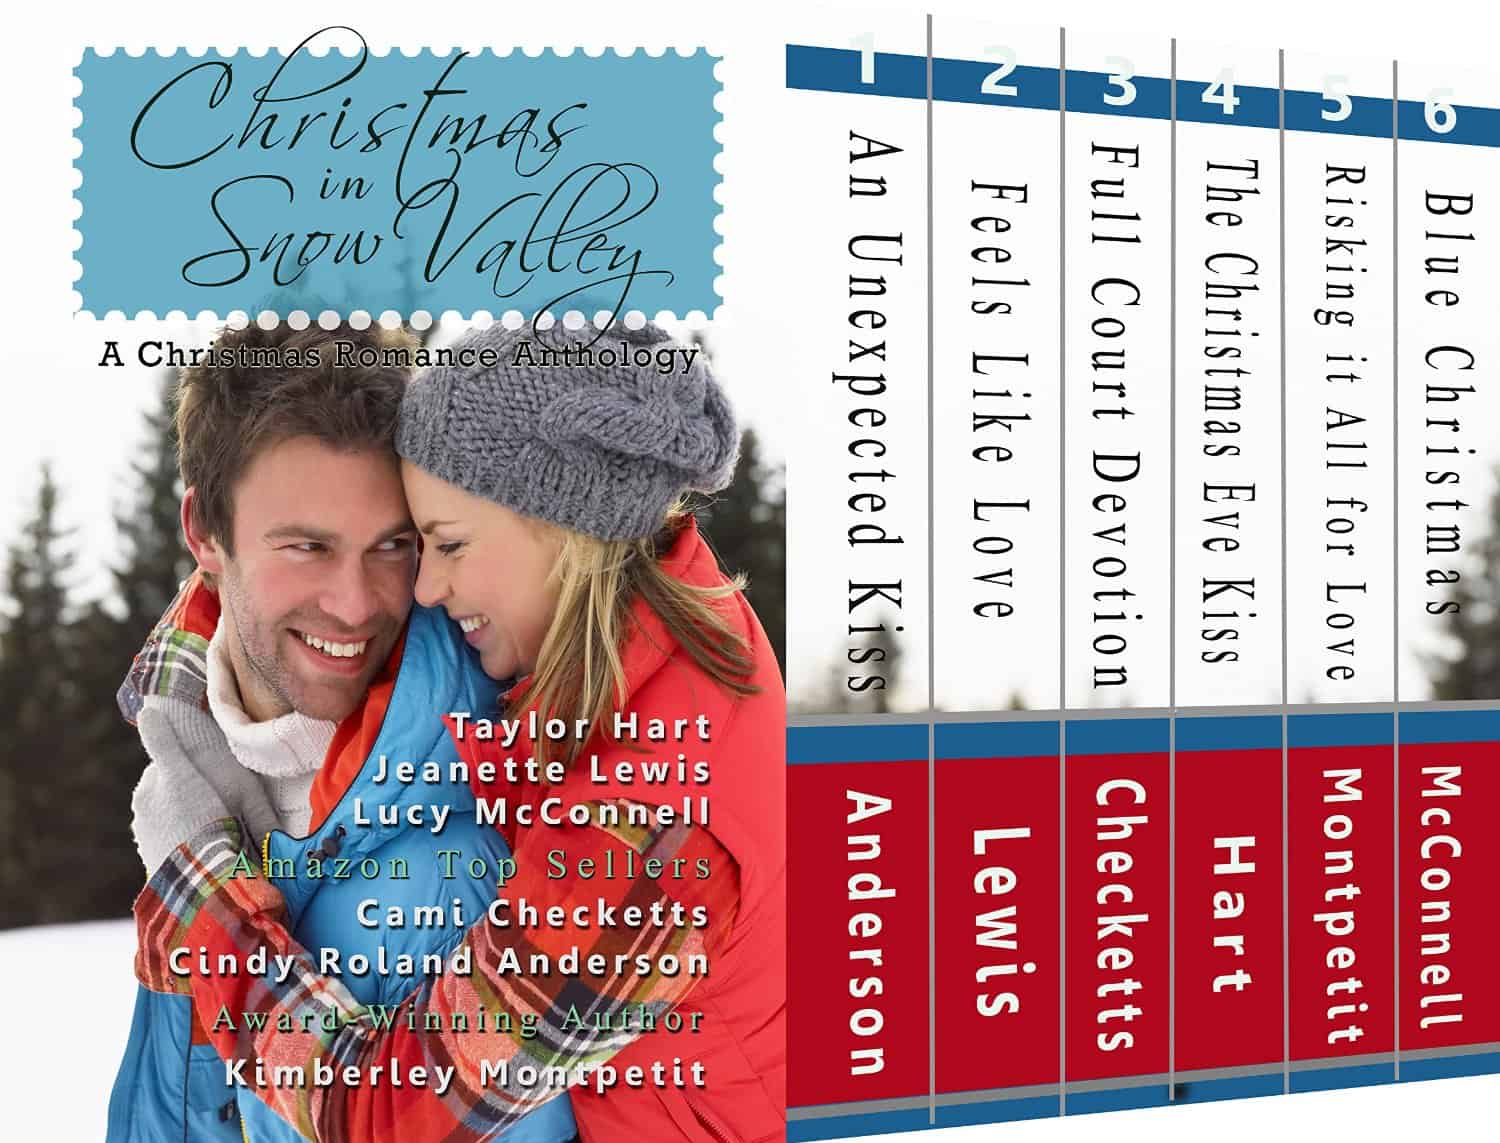 Christmas in Snow Valley: An Unexpected Kiss by Cindy Roland Anderson